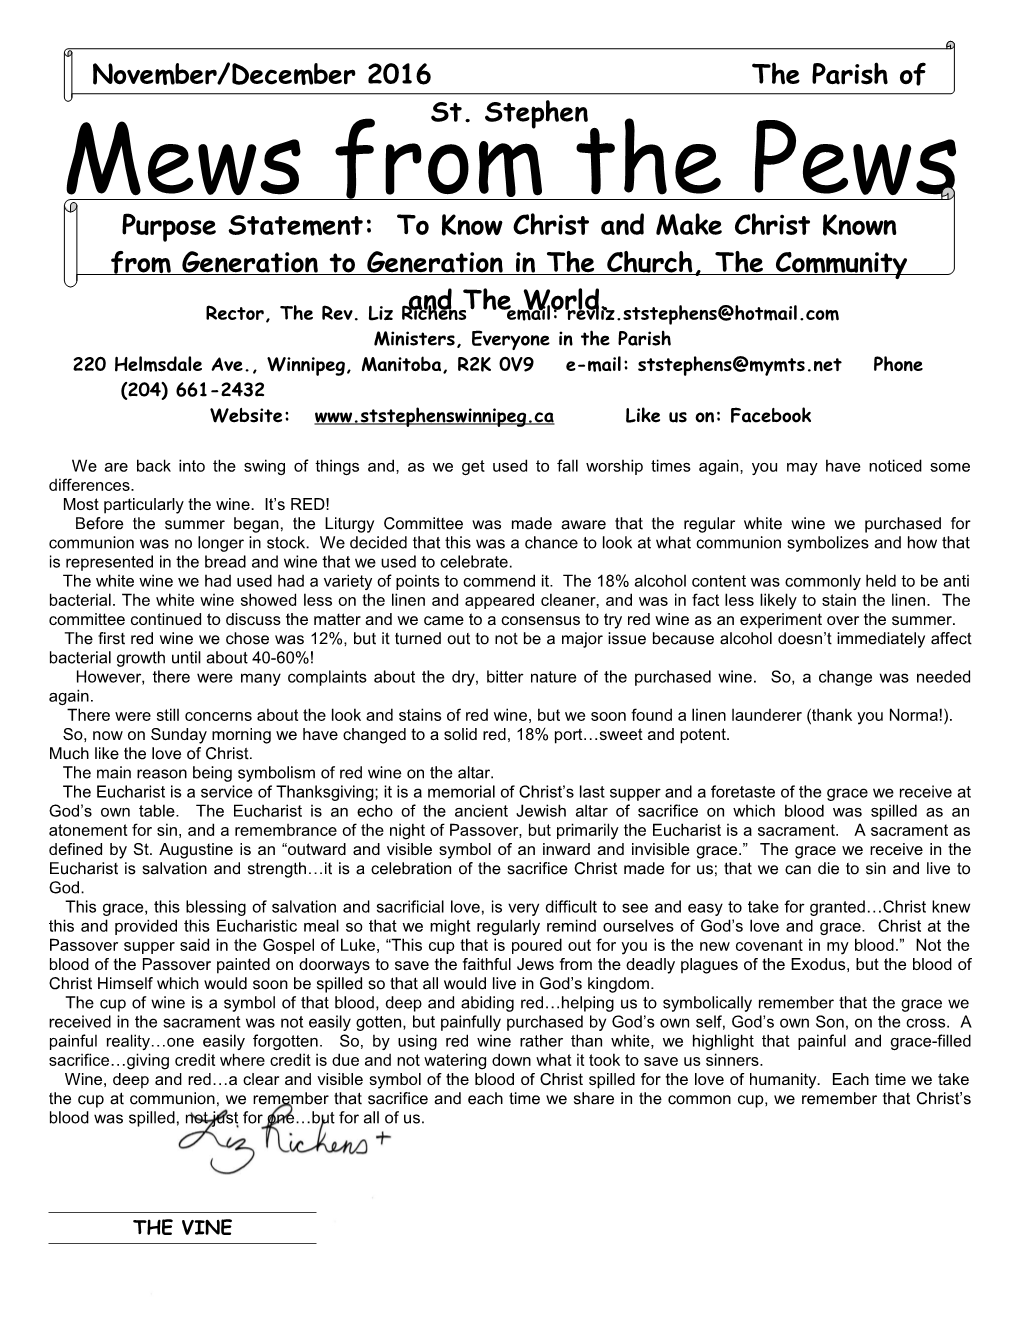 Mews from the Pews